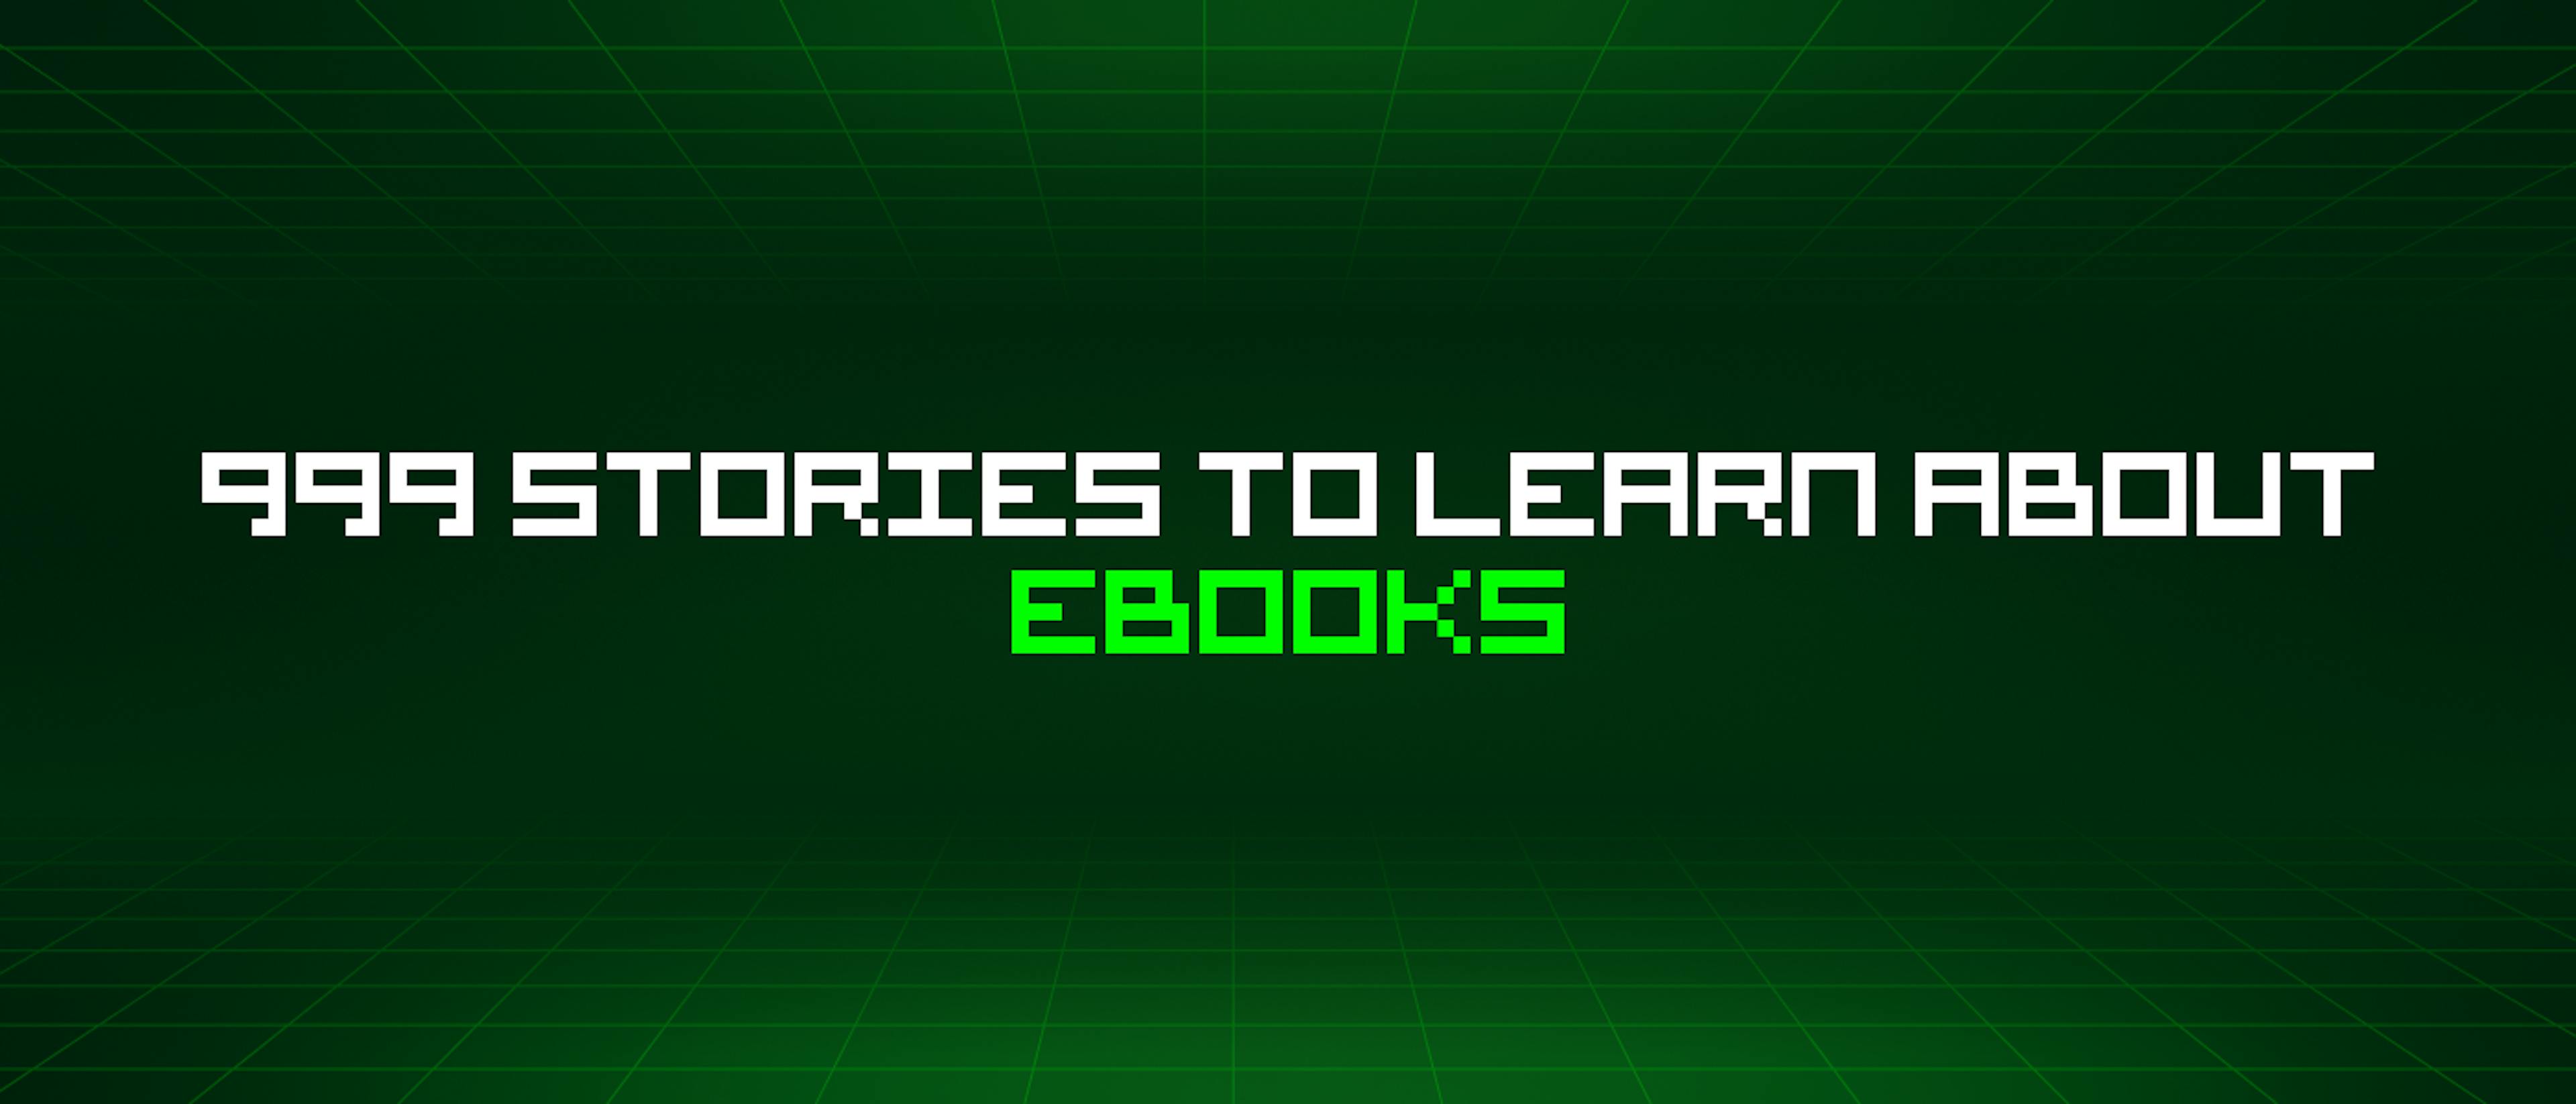 featured image - 999 Stories To Learn About Ebooks